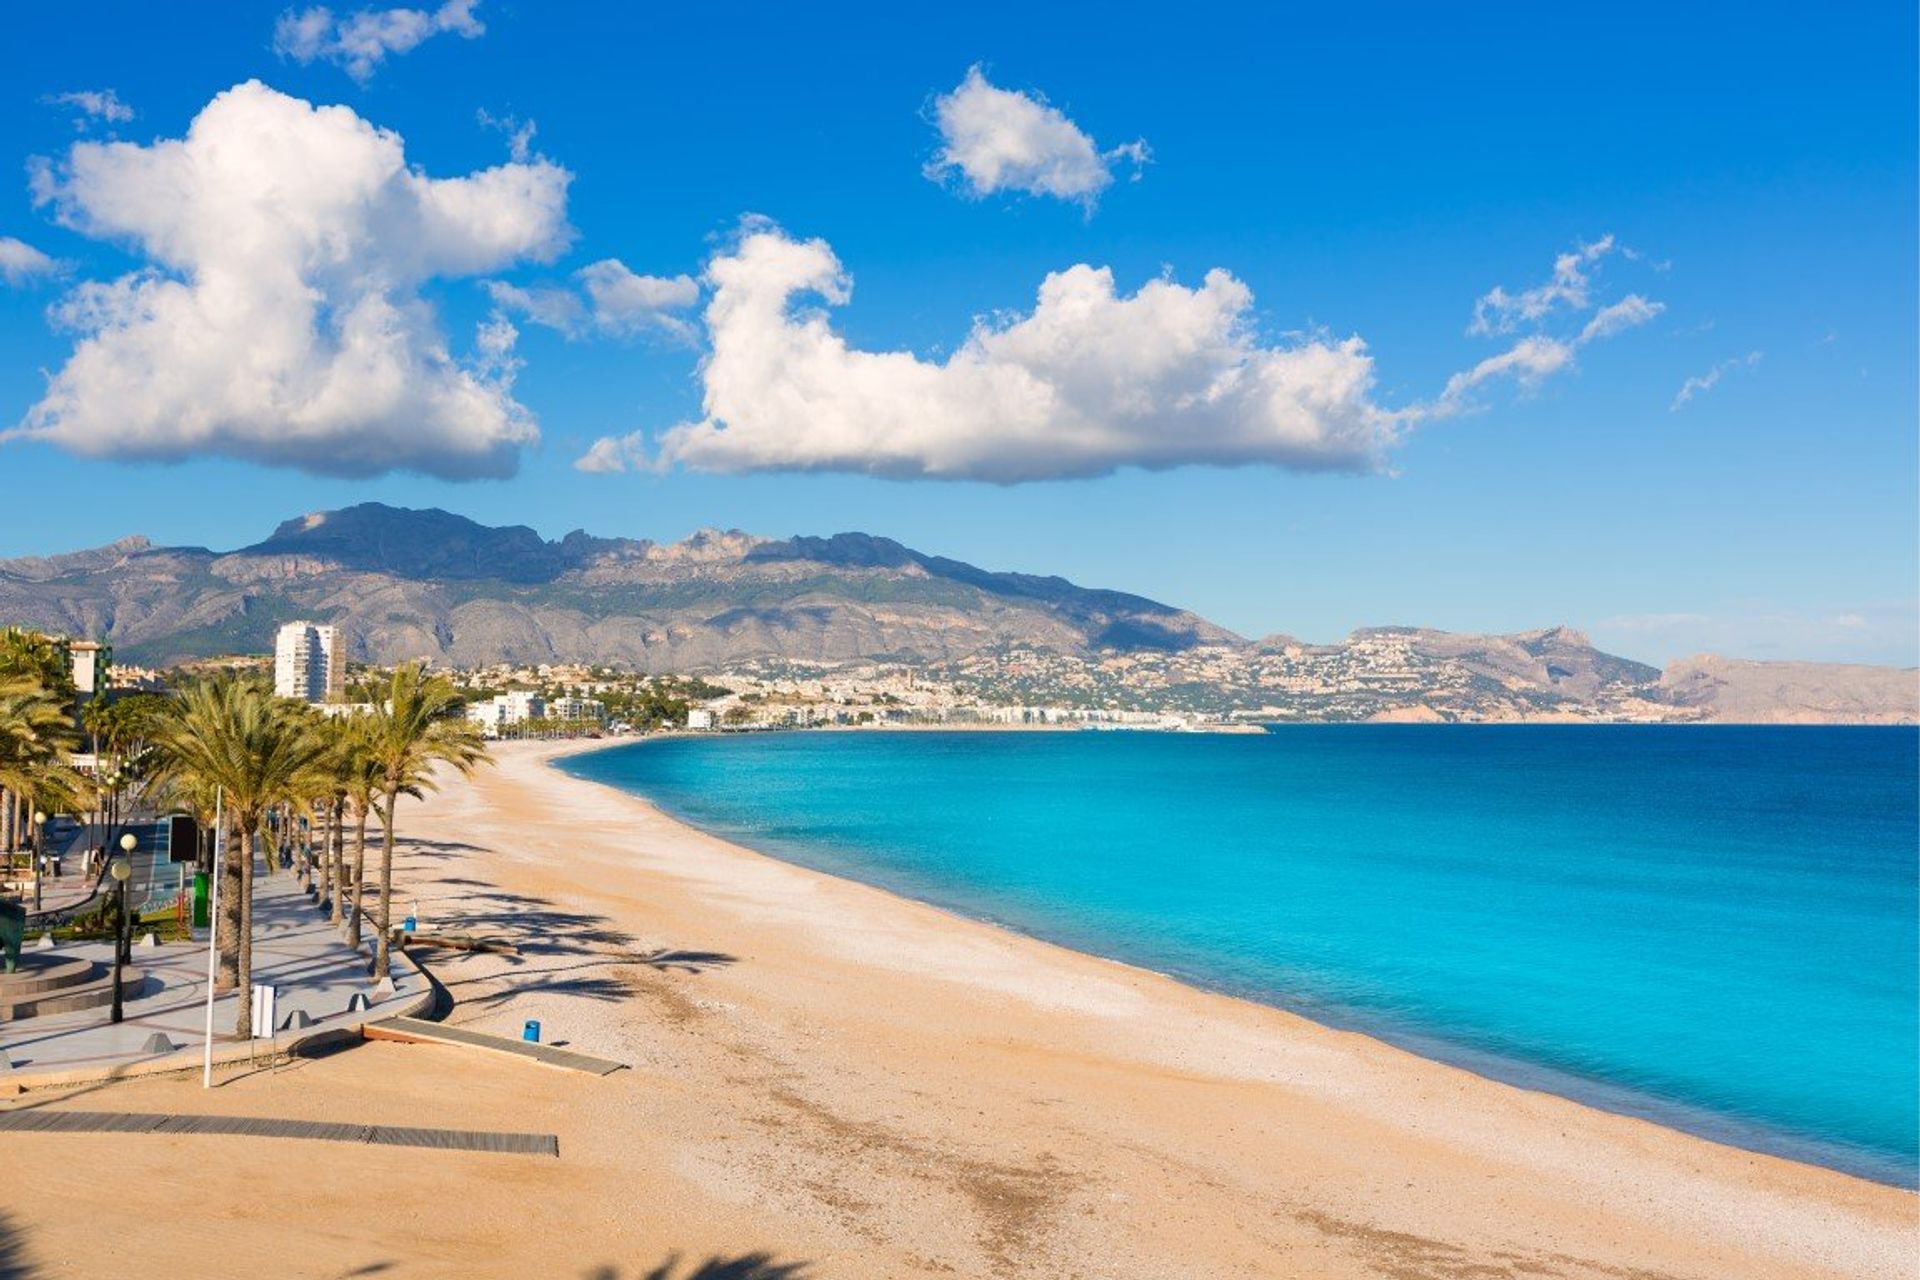 Find your own slice of paradise and unwind on 600m-long, family-friendly Playa de Albir